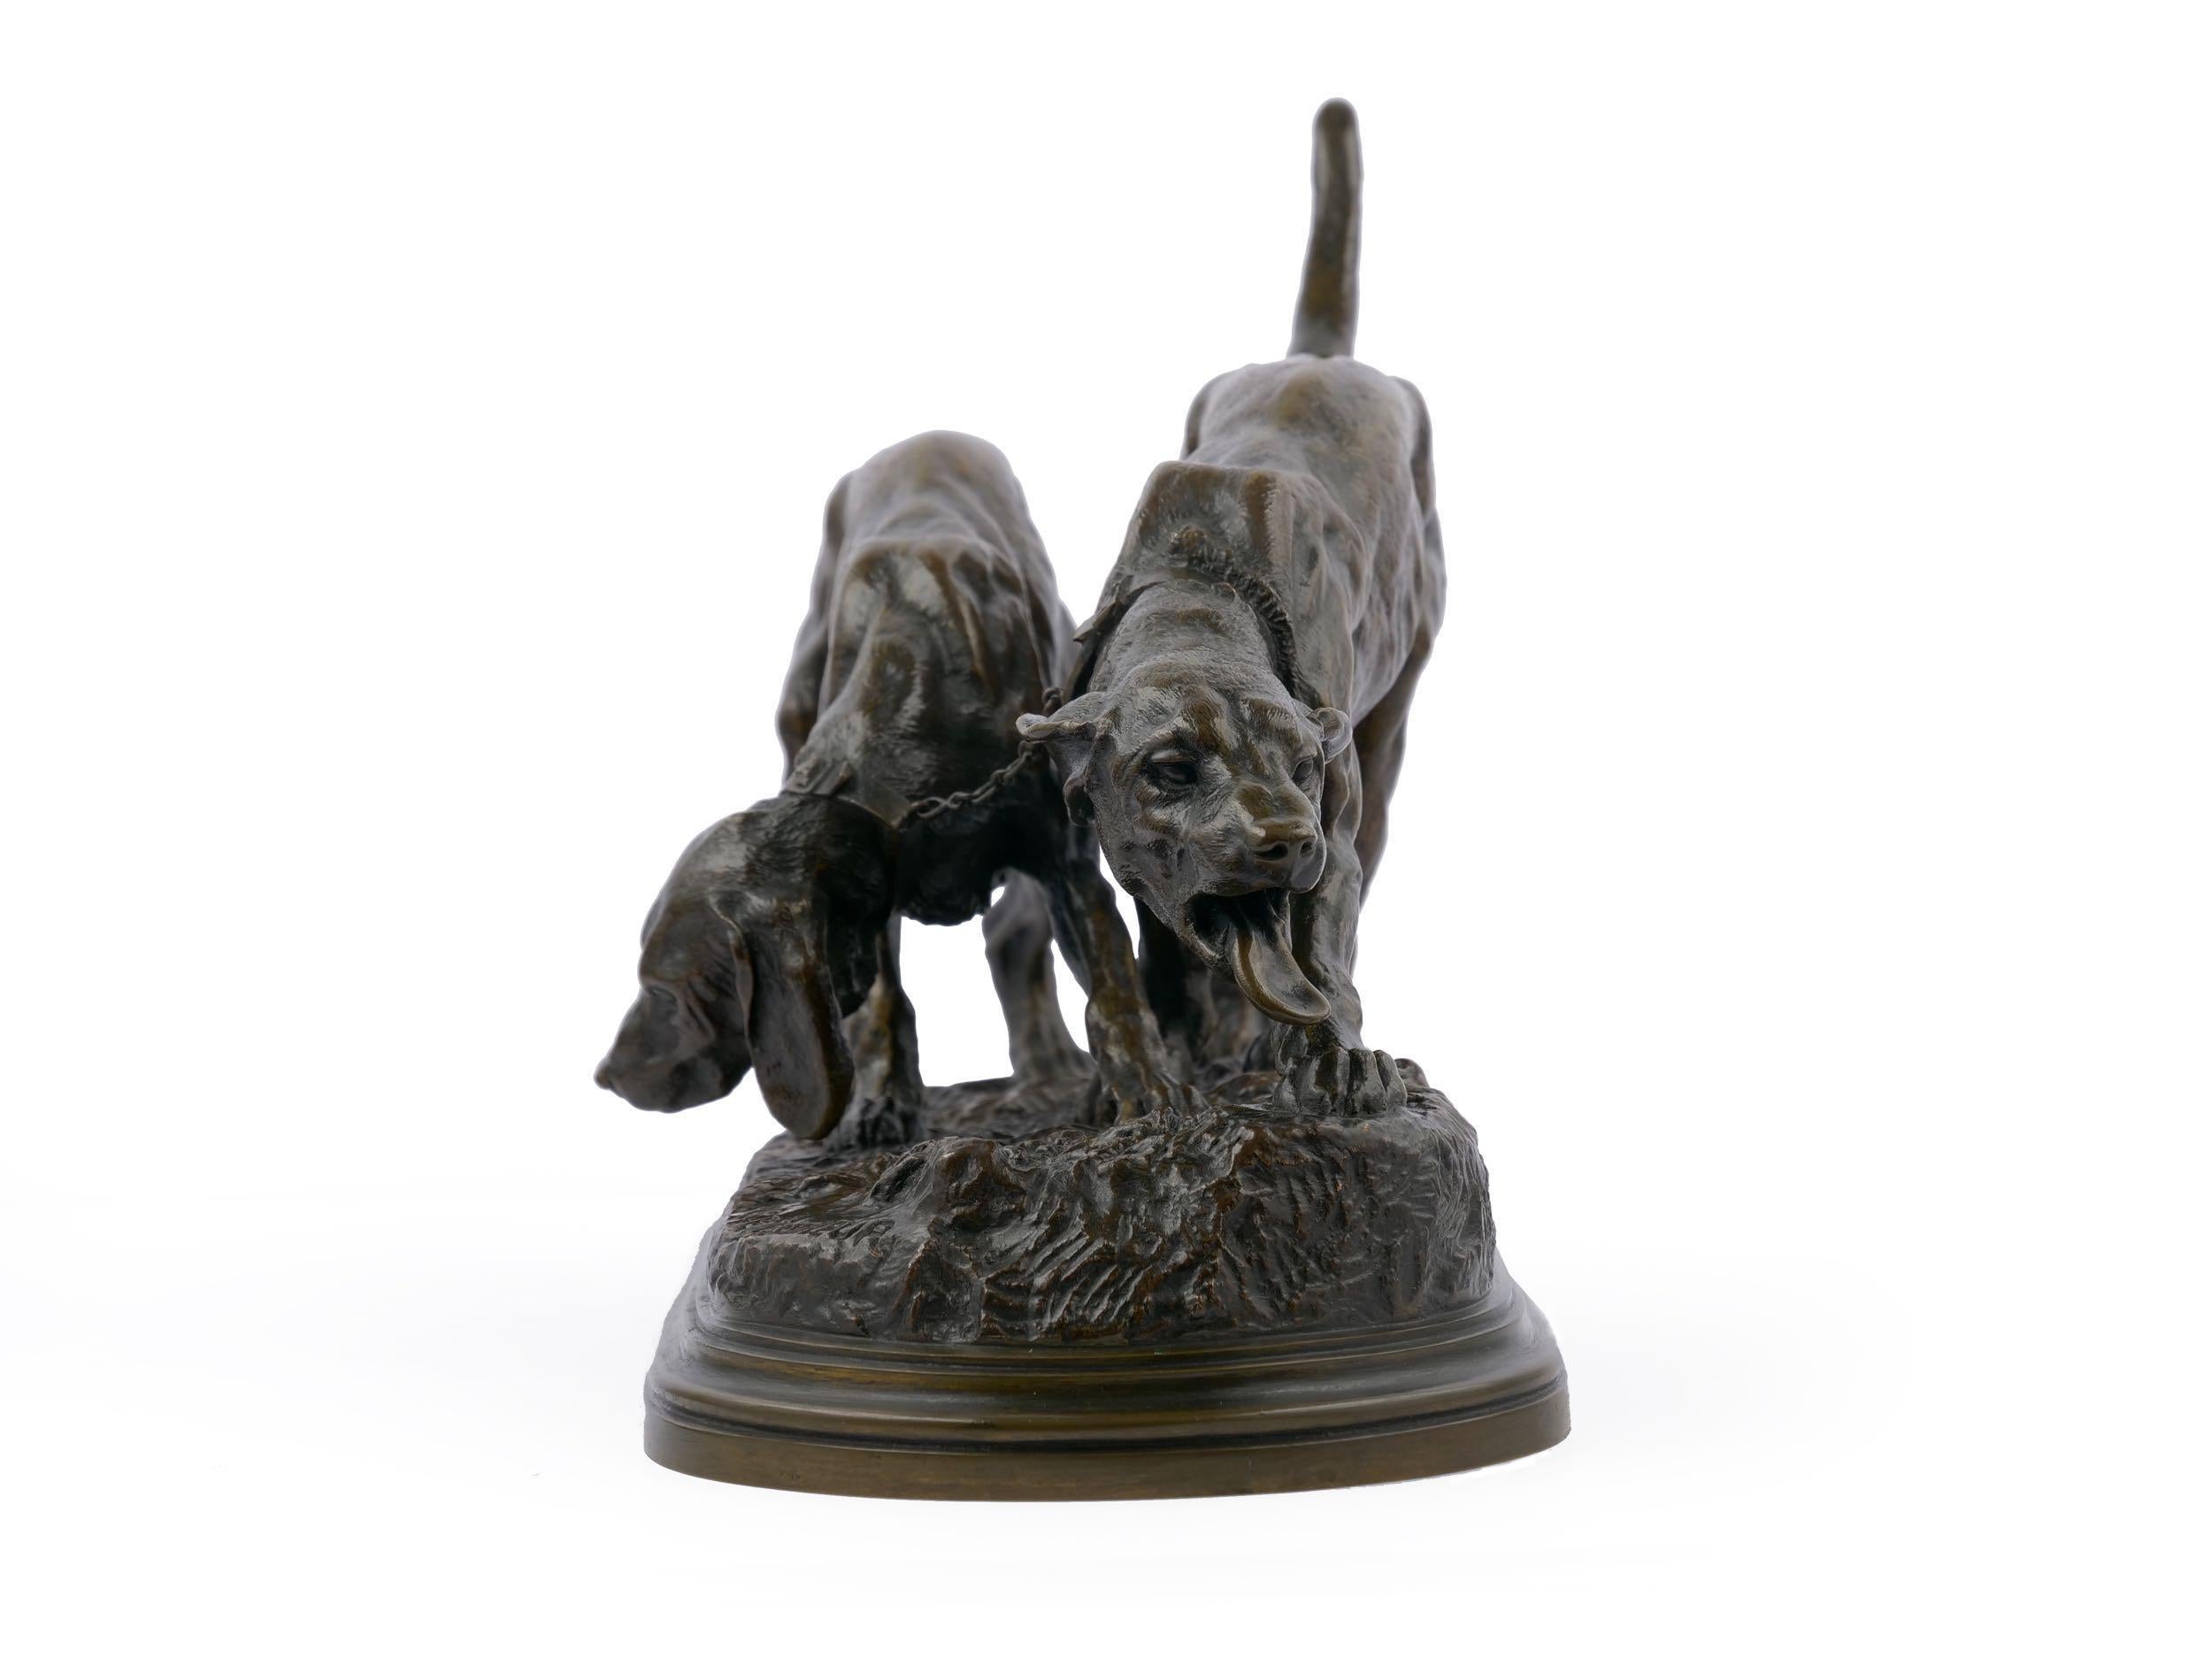 An incredibly fine sand-cast model of two hunting dogs bound together by chain links, they have caught the scent of game in the air and a frenzy has overtaken both of them. The work is almost certainly cast by the Hippolyte Peyrol foundry in light